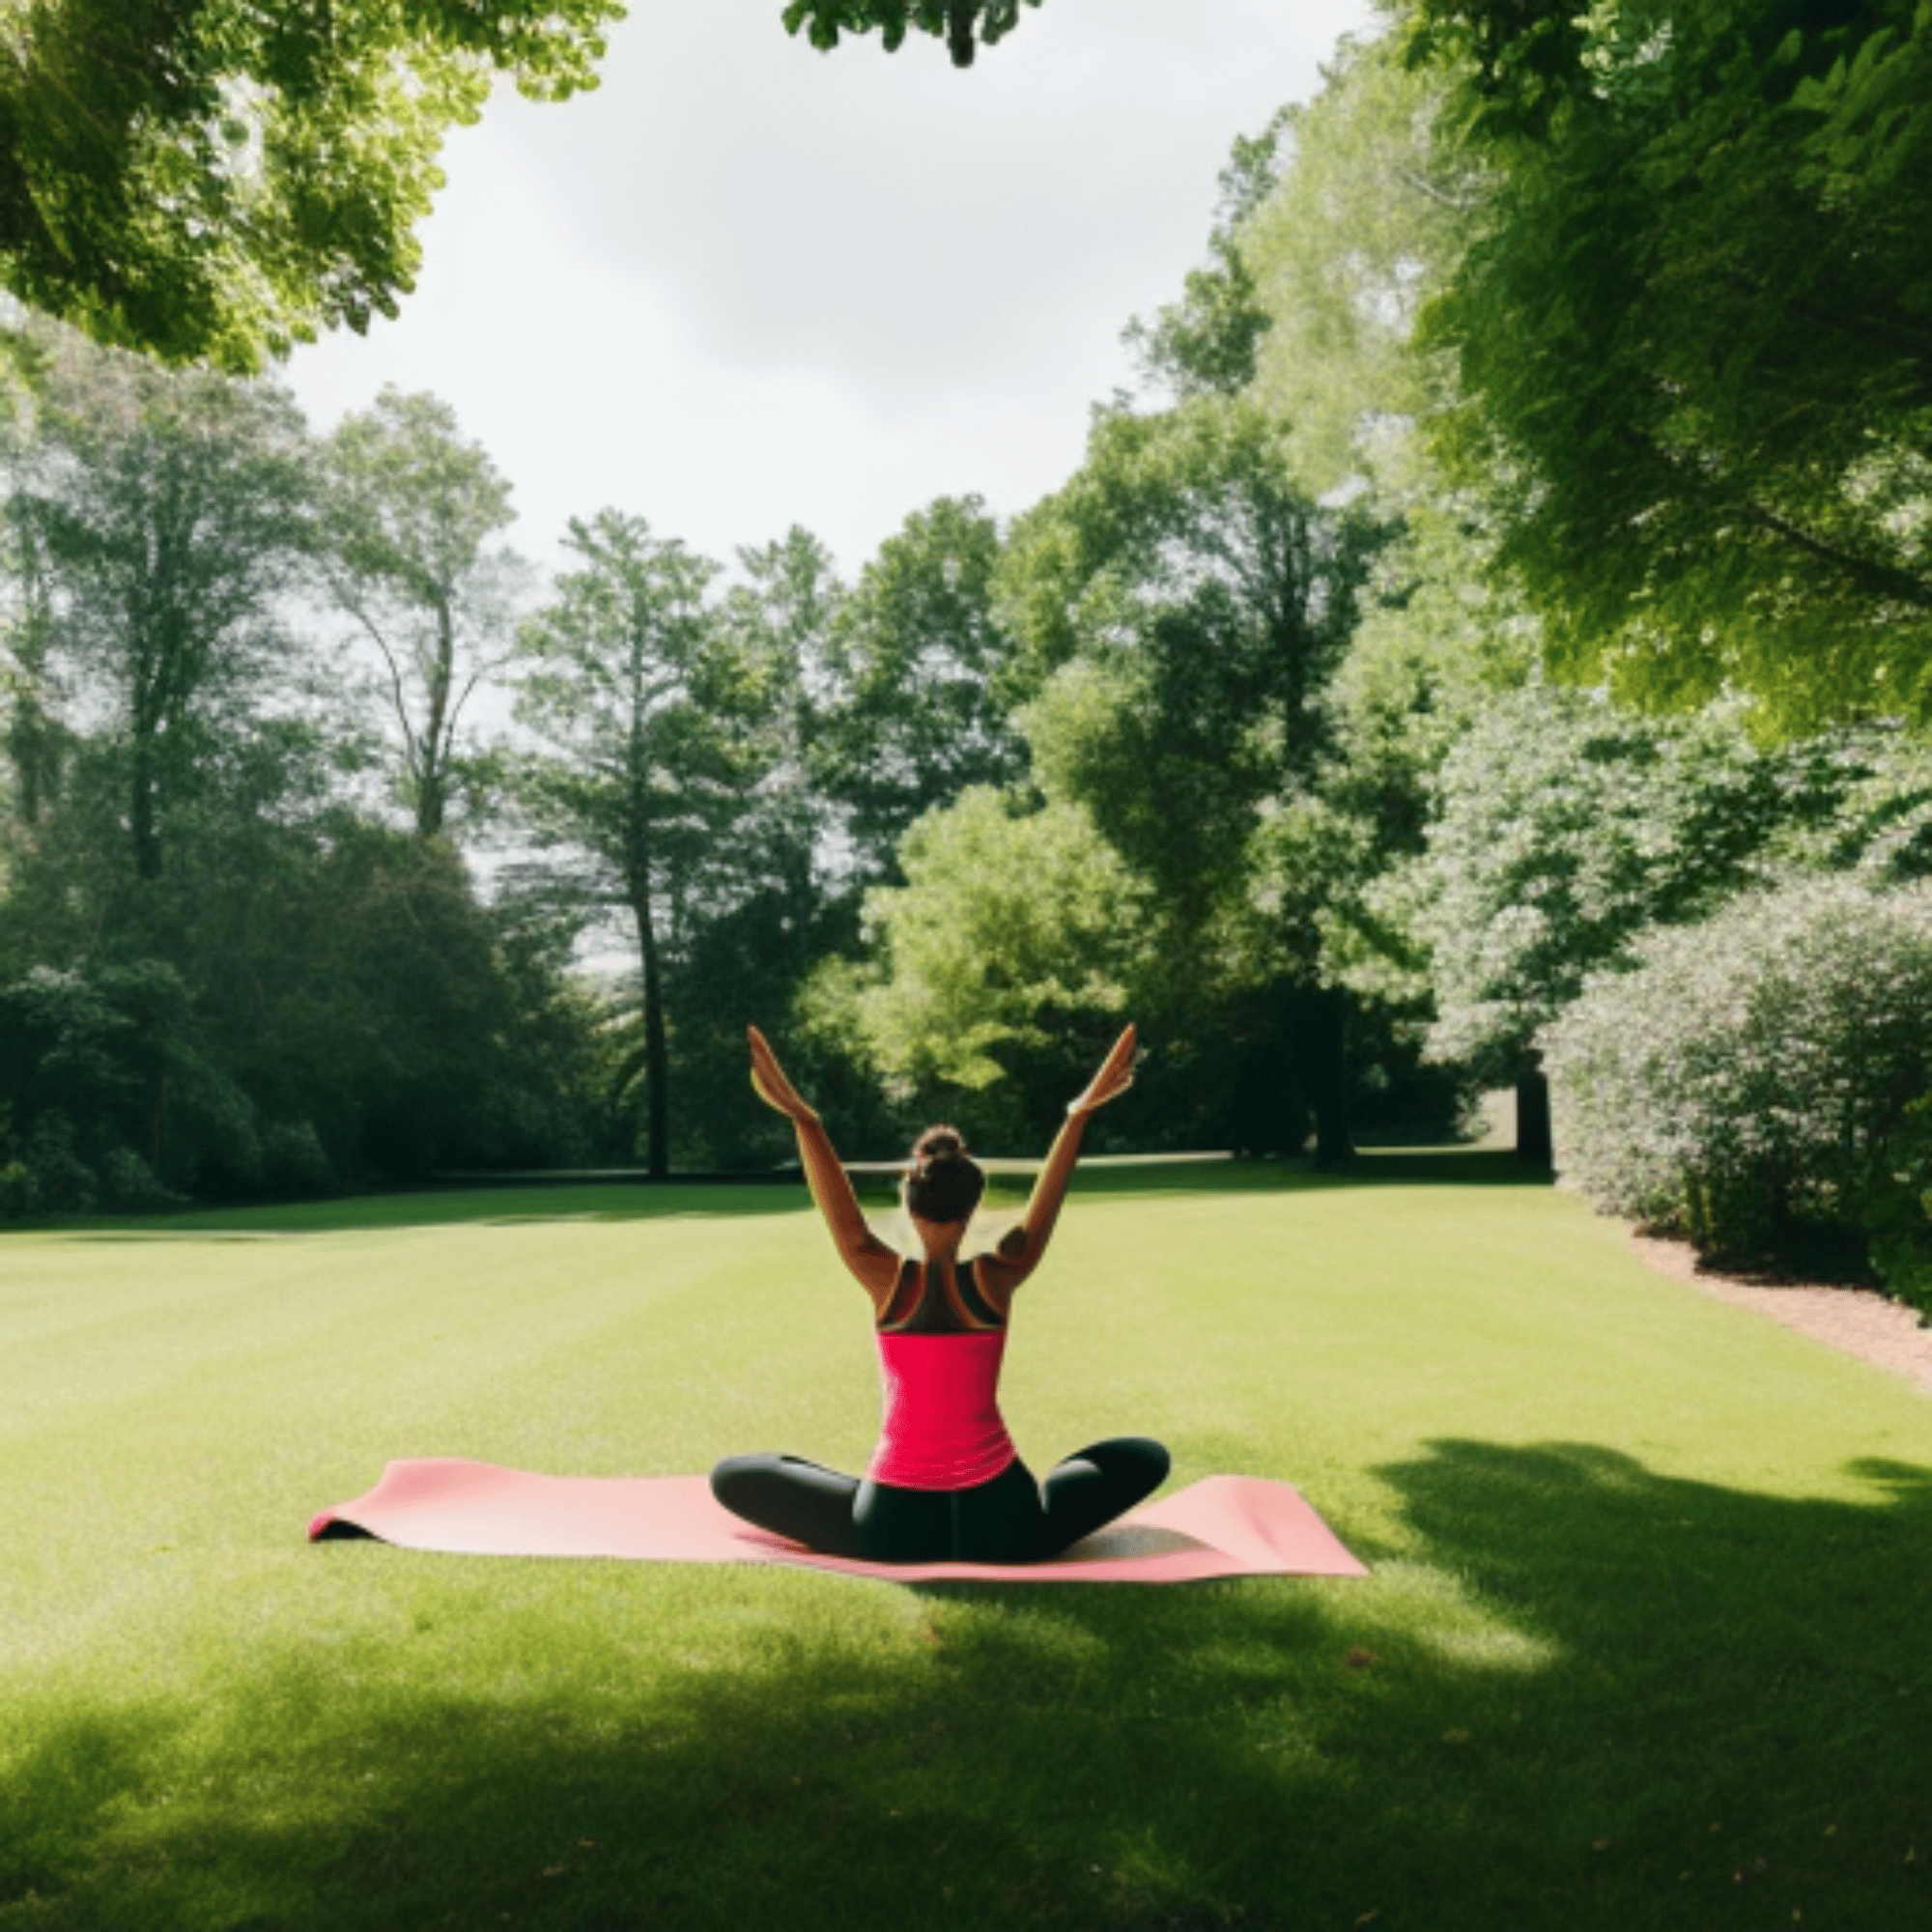 A person doing a yoga pose in a park surrounded by trees and greenery